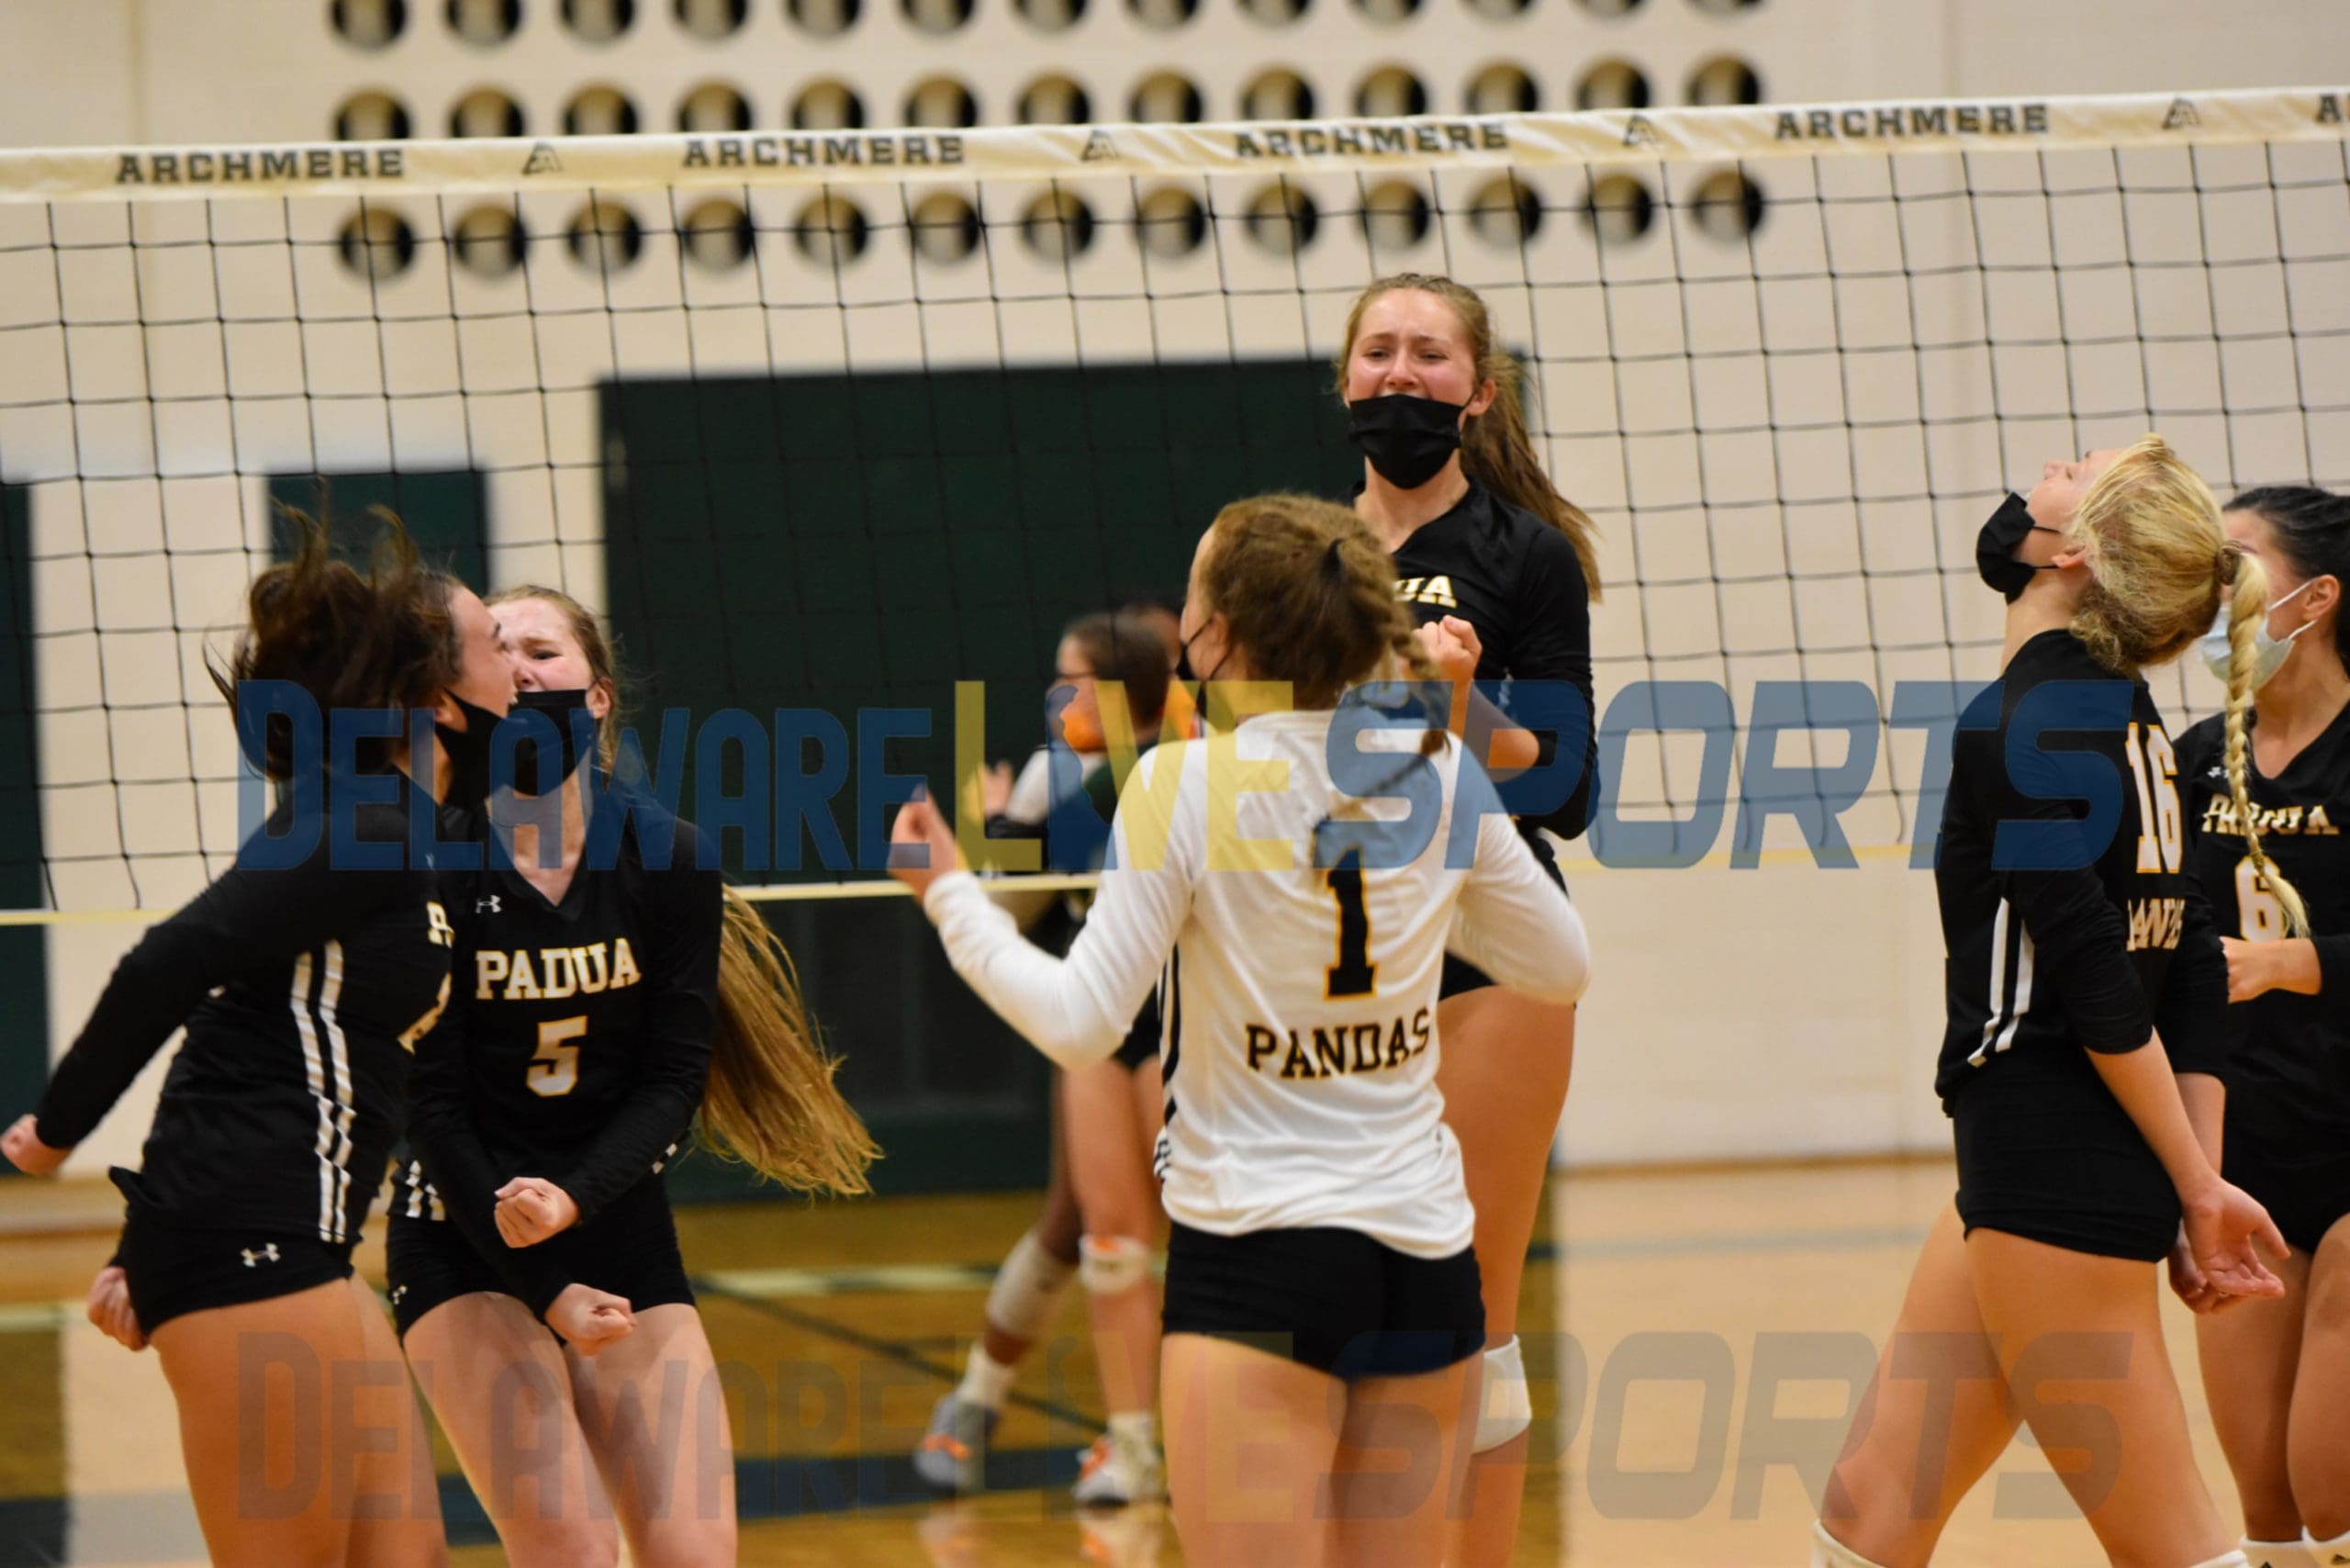 Padua vs Archmere volleyball photos